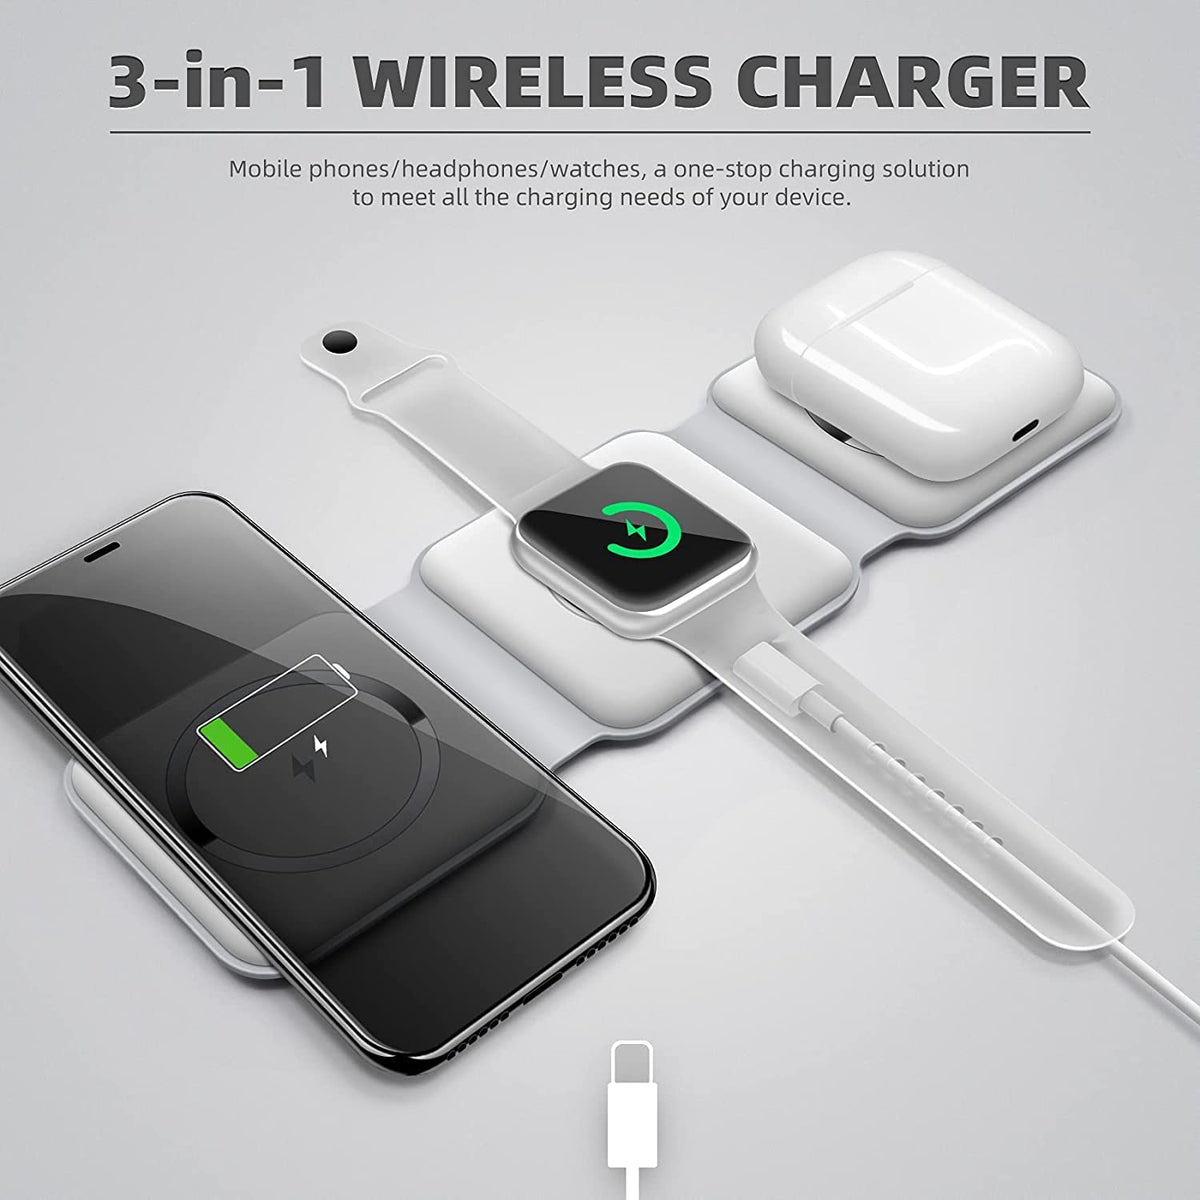 3-in-1 Wireless Charging Pad - Ansoo Store